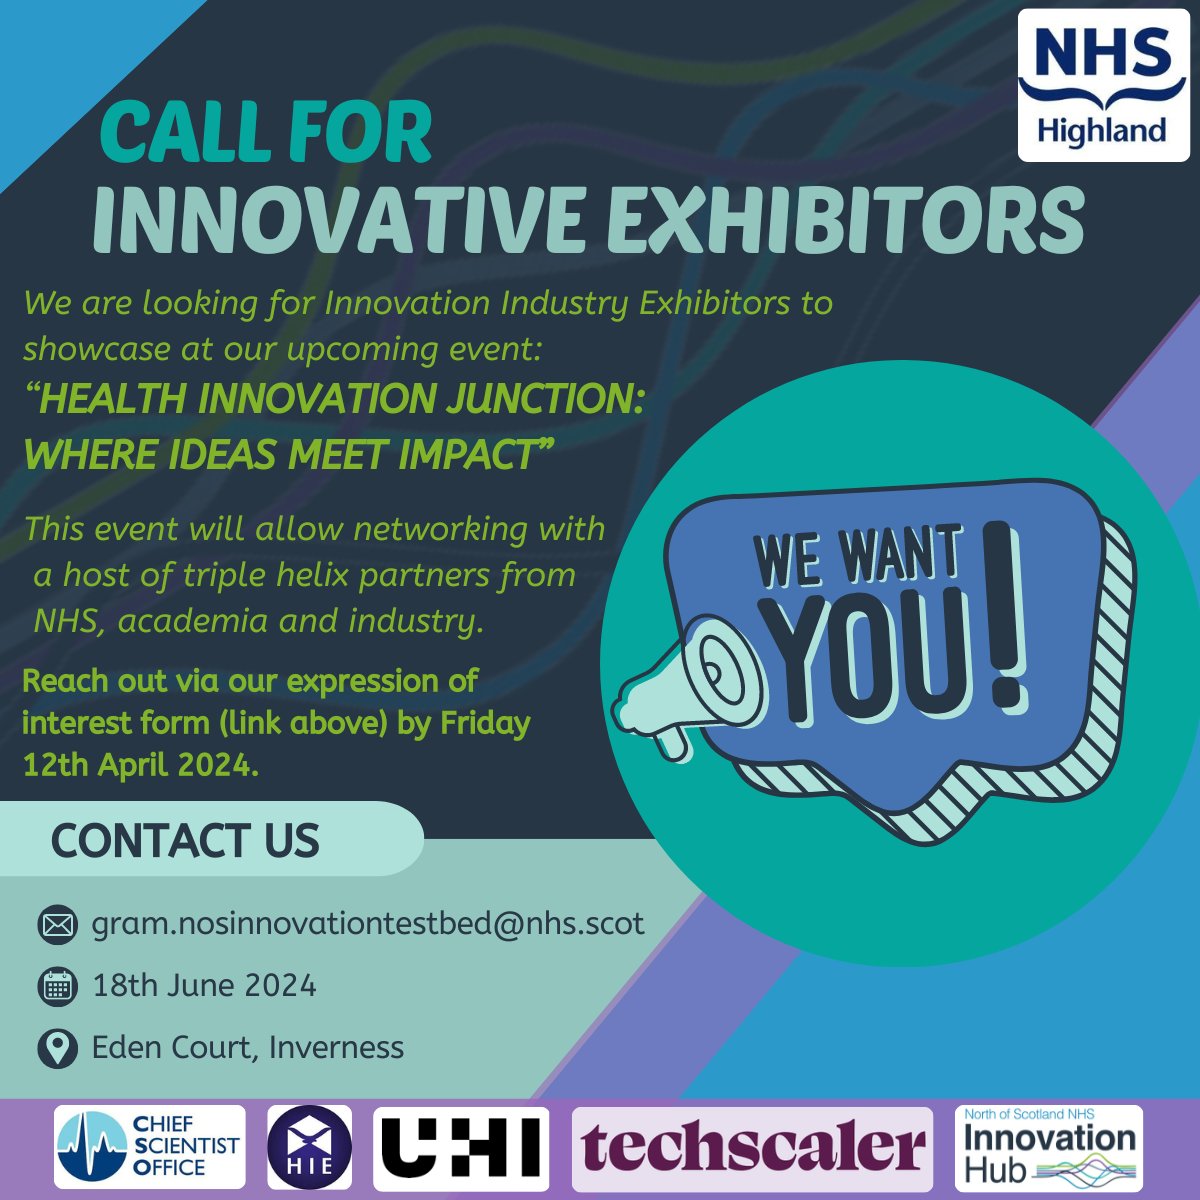 18th June 2024! Health Innovation Junction: Where Ideas Meet Impact. Come meet and greet to share and compare innovative ideas and designs. Express your interest in exhibiting using this link: eur01.safelinks.protection.outlook.com/?url=https%3A%…